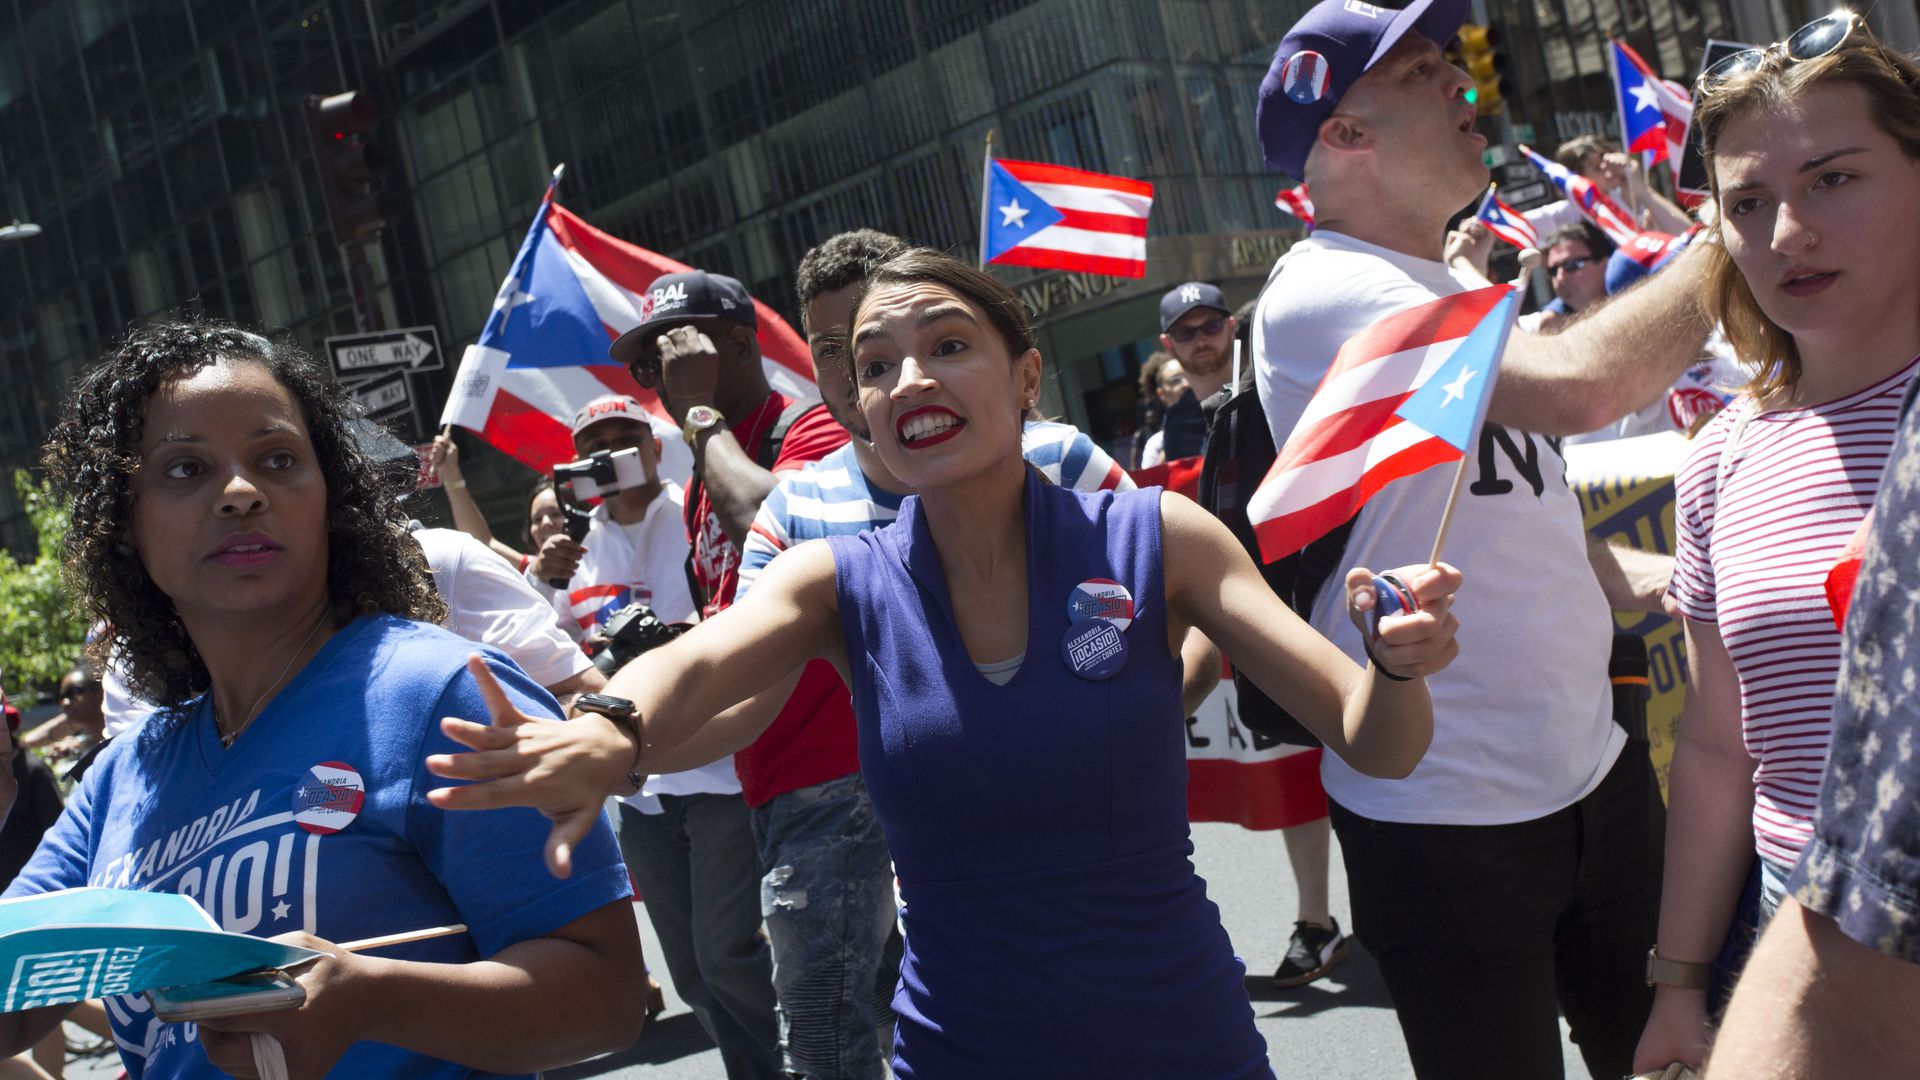 Rep. Alexandria Ocasio-Cortez is seen marching in a Puerto Rico Day parade in New York City.